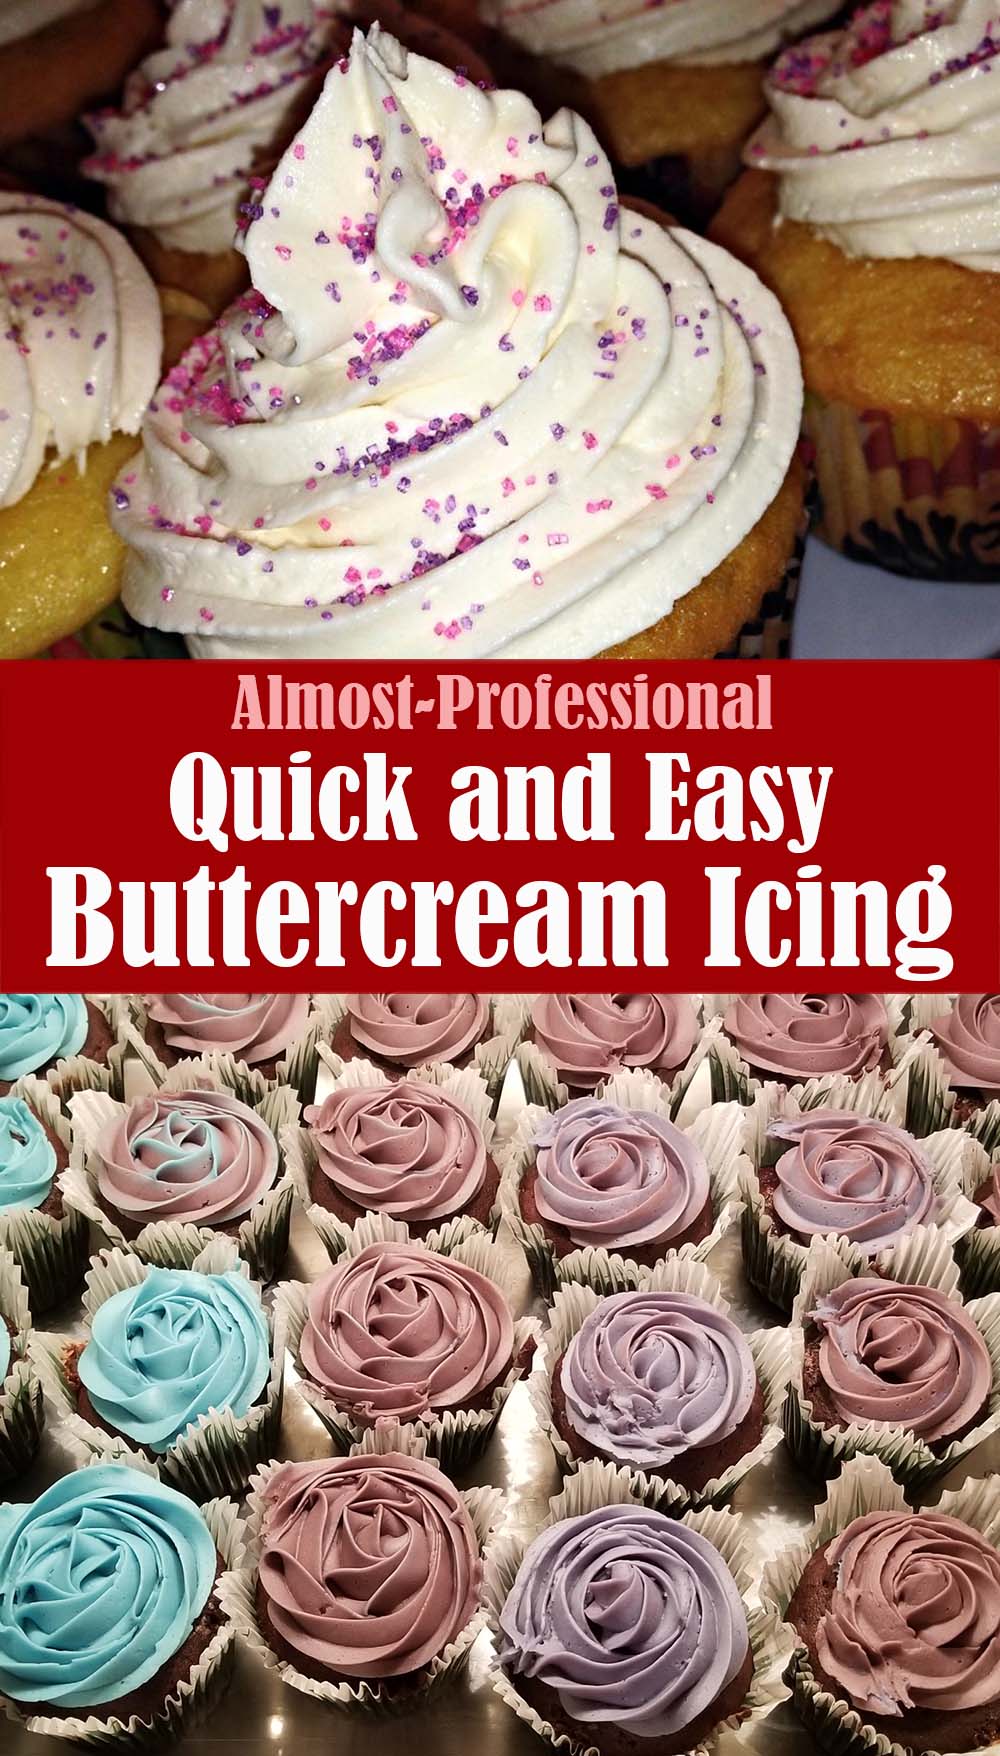 Quick and Easy Buttercream Icing